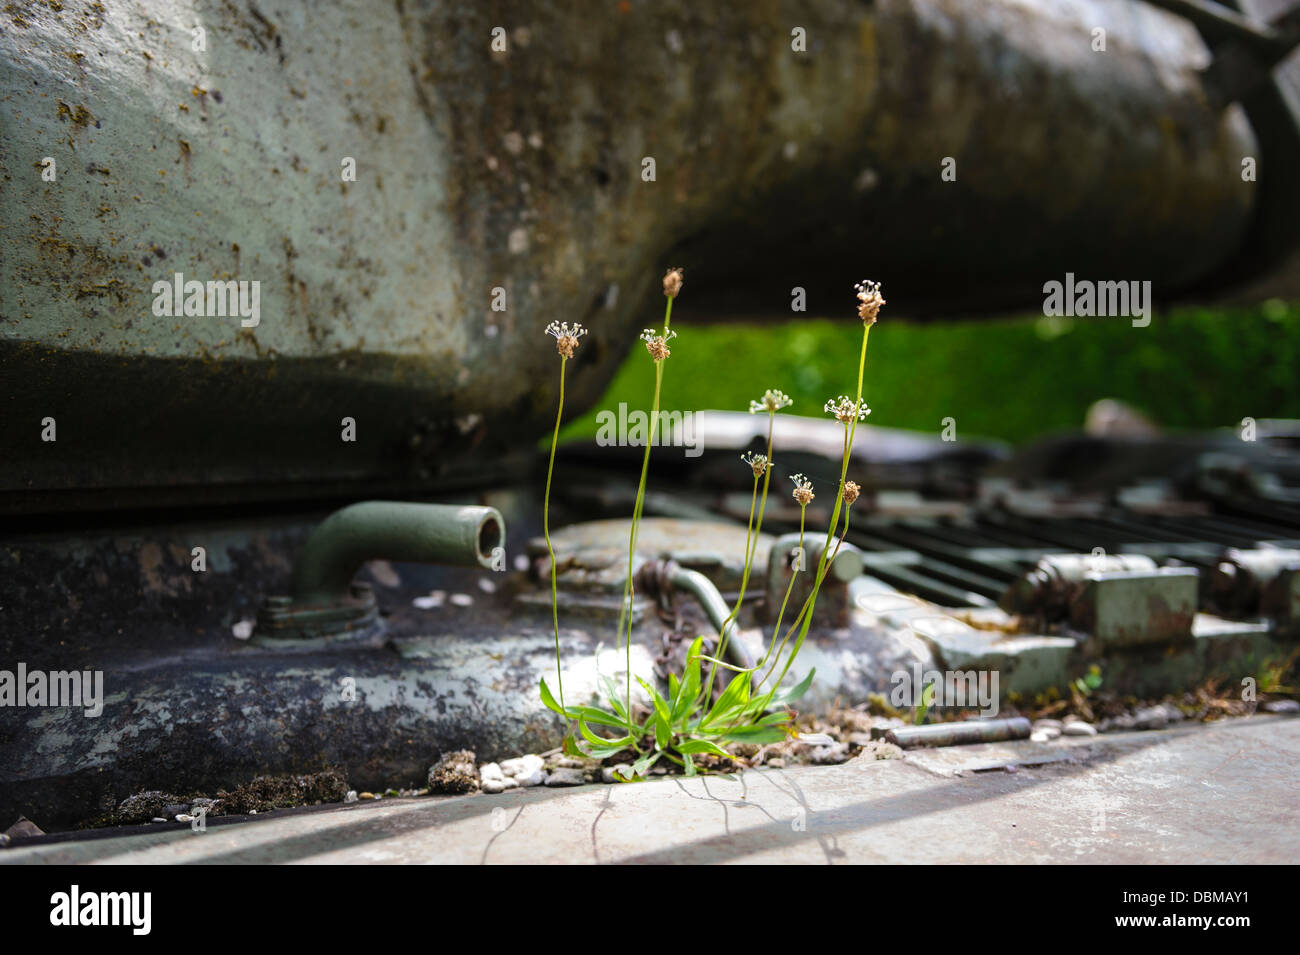 Flowers growing on an old American tank from WW11 at Valmy, Marne, France Stock Photo